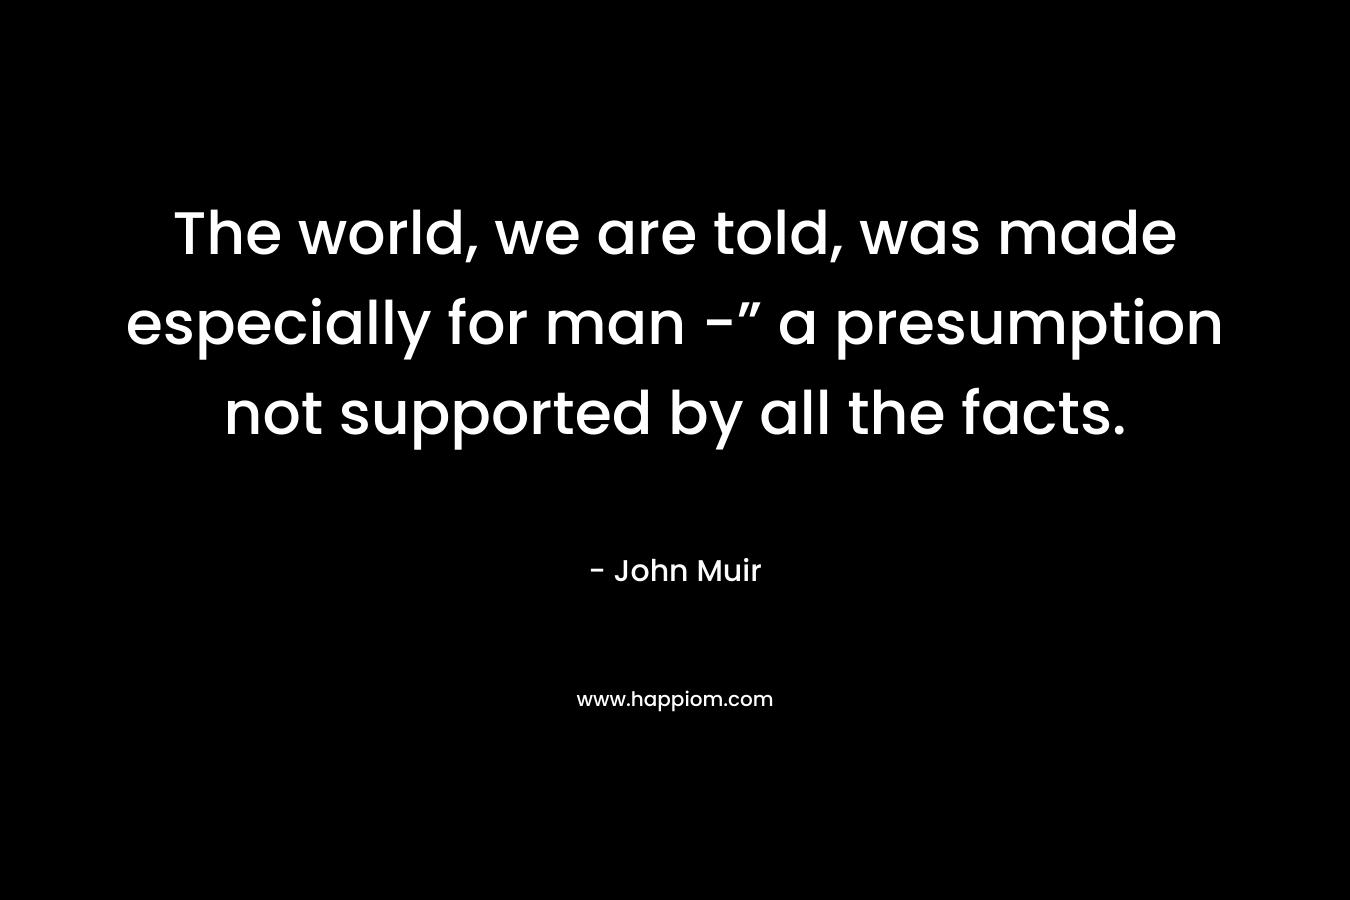 The world, we are told, was made especially for man -” a presumption not supported by all the facts.